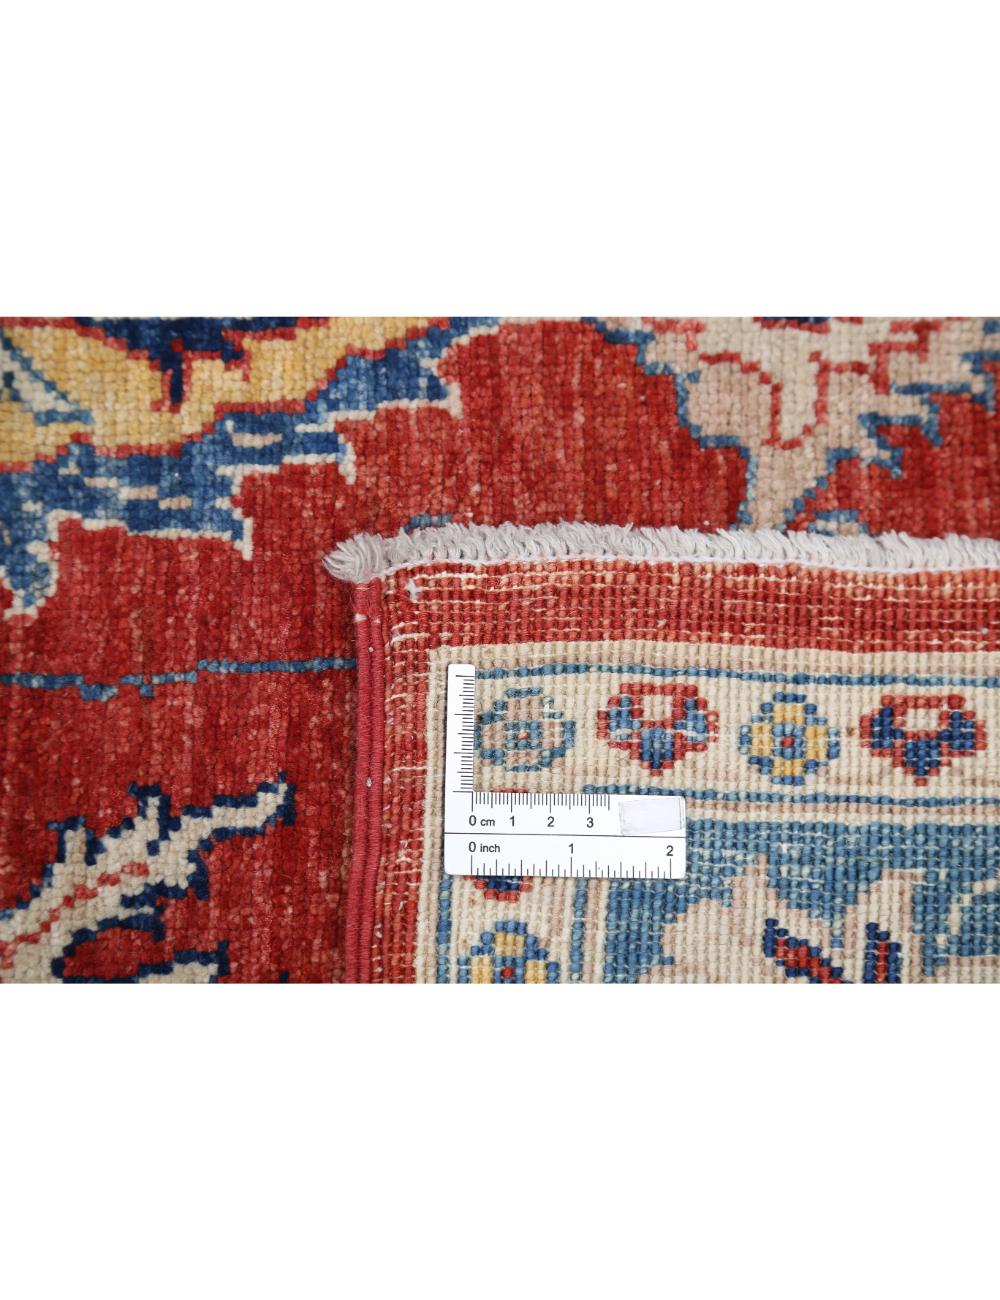 Ziegler 3' 4" X 5' 0" Hand-Knotted Wool Rug 3' 4" X 5' 0" (102 X 152) / Red / Blue